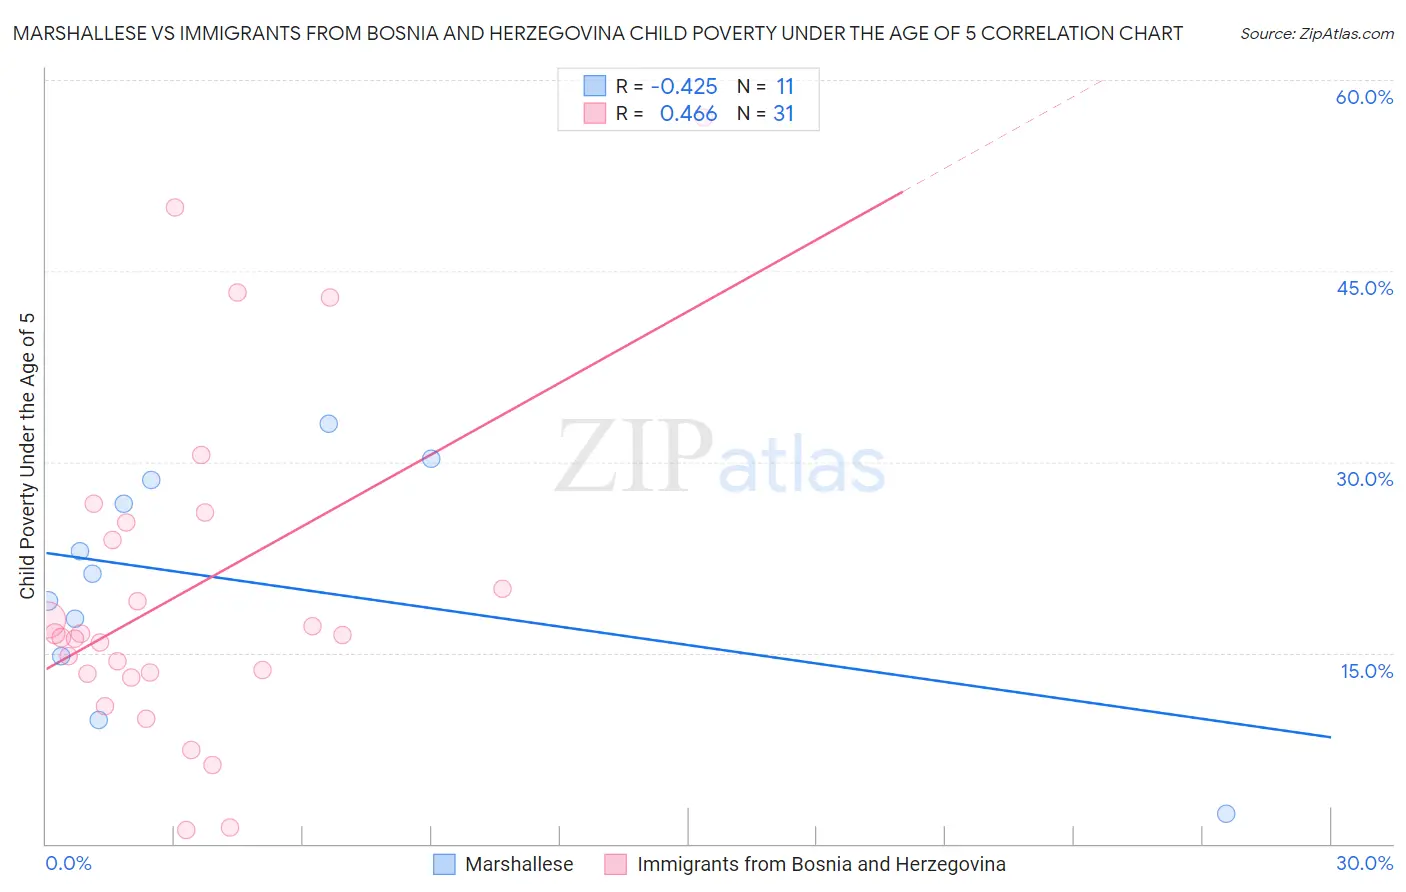 Marshallese vs Immigrants from Bosnia and Herzegovina Child Poverty Under the Age of 5